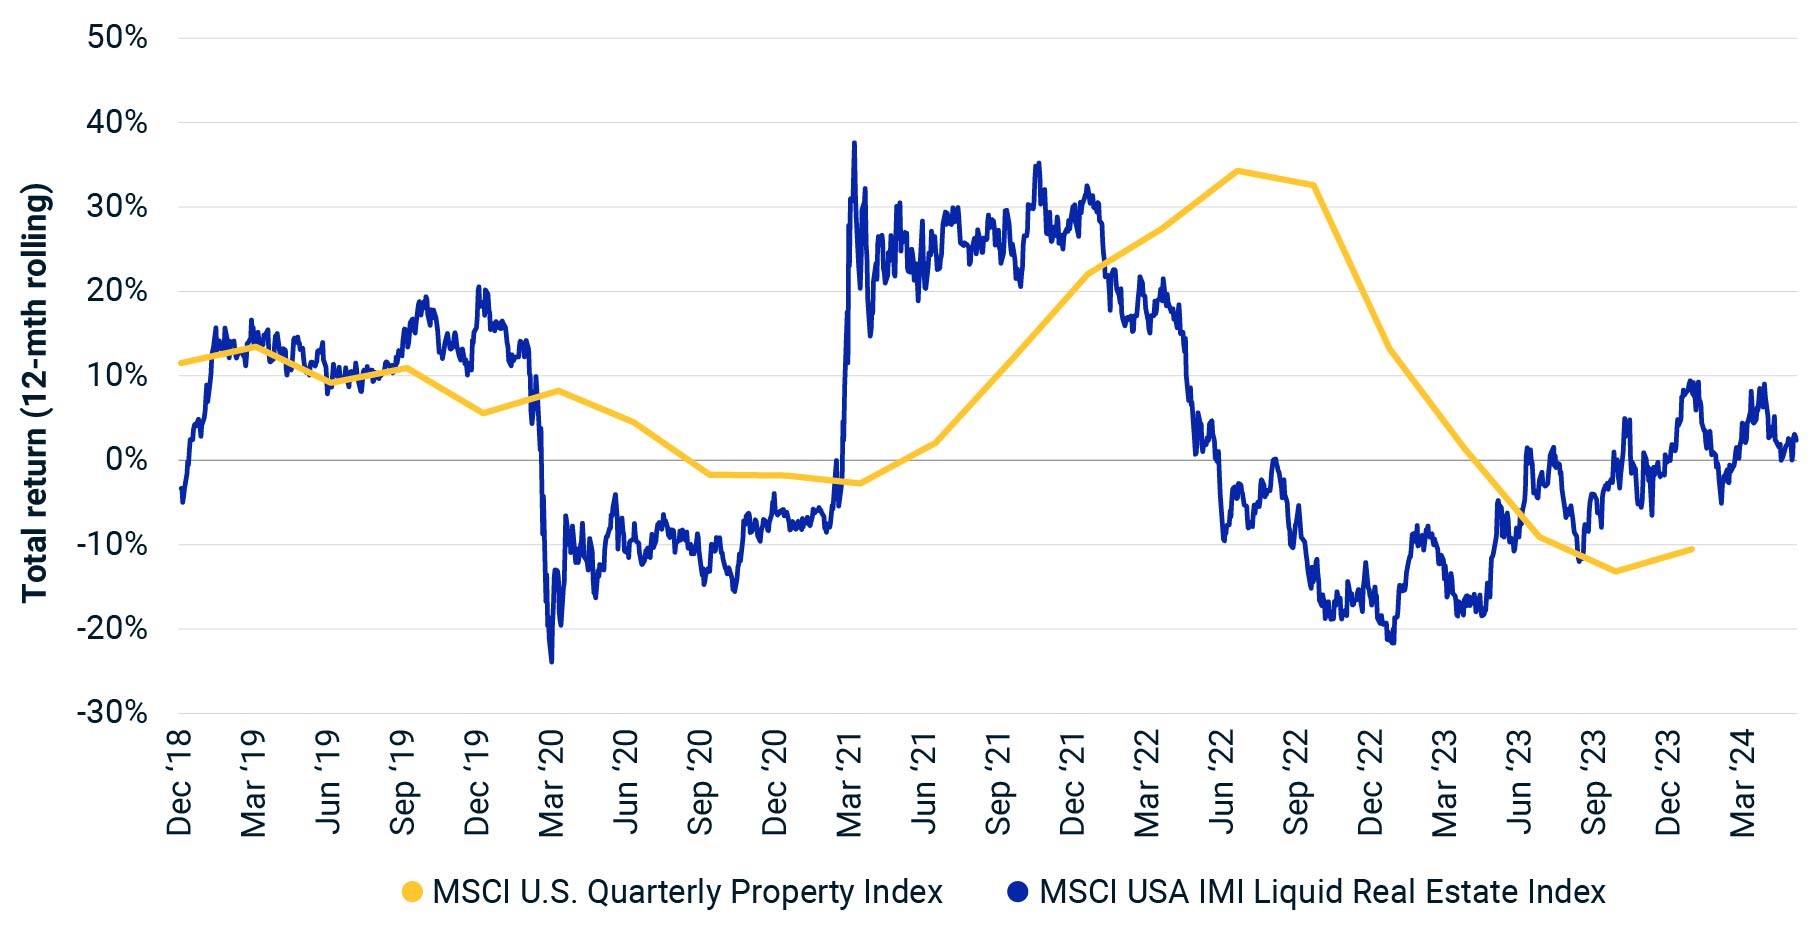 The line graph shows the total return of MSCI’s U.S. quarterly property index and the U.S. liquid real estate index since 2018.